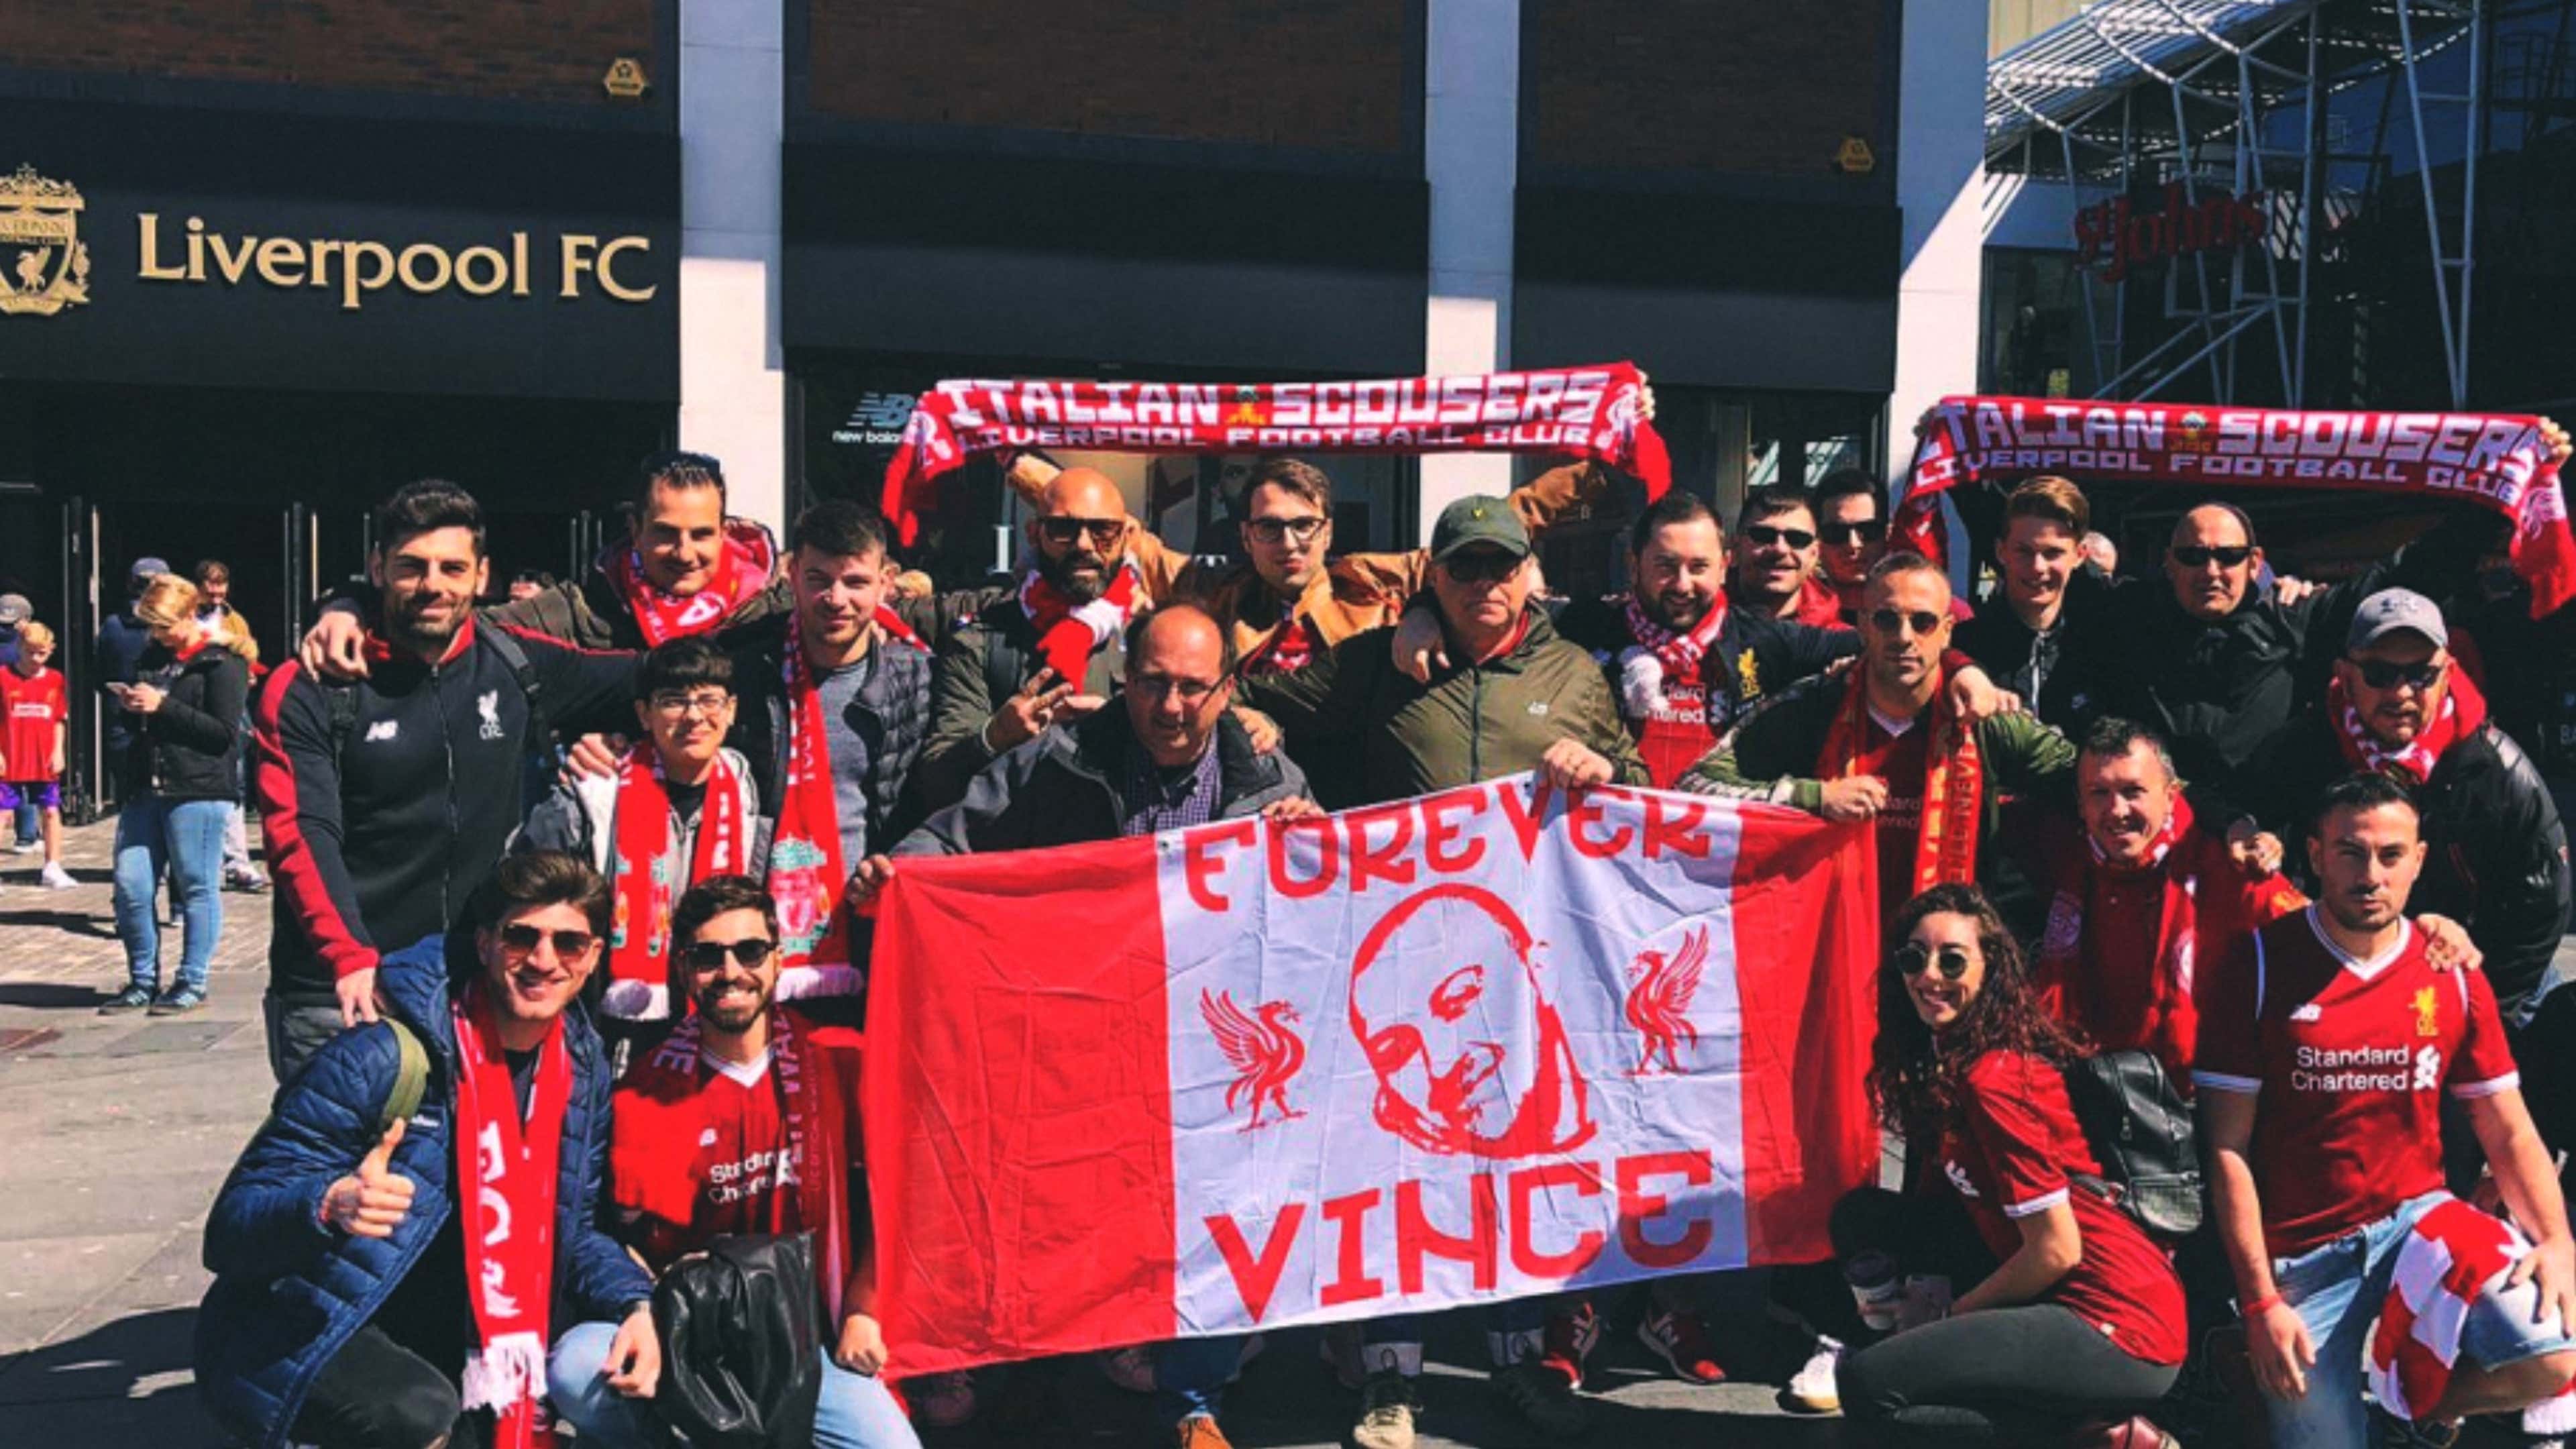 Liverpool Supporters Club Italy